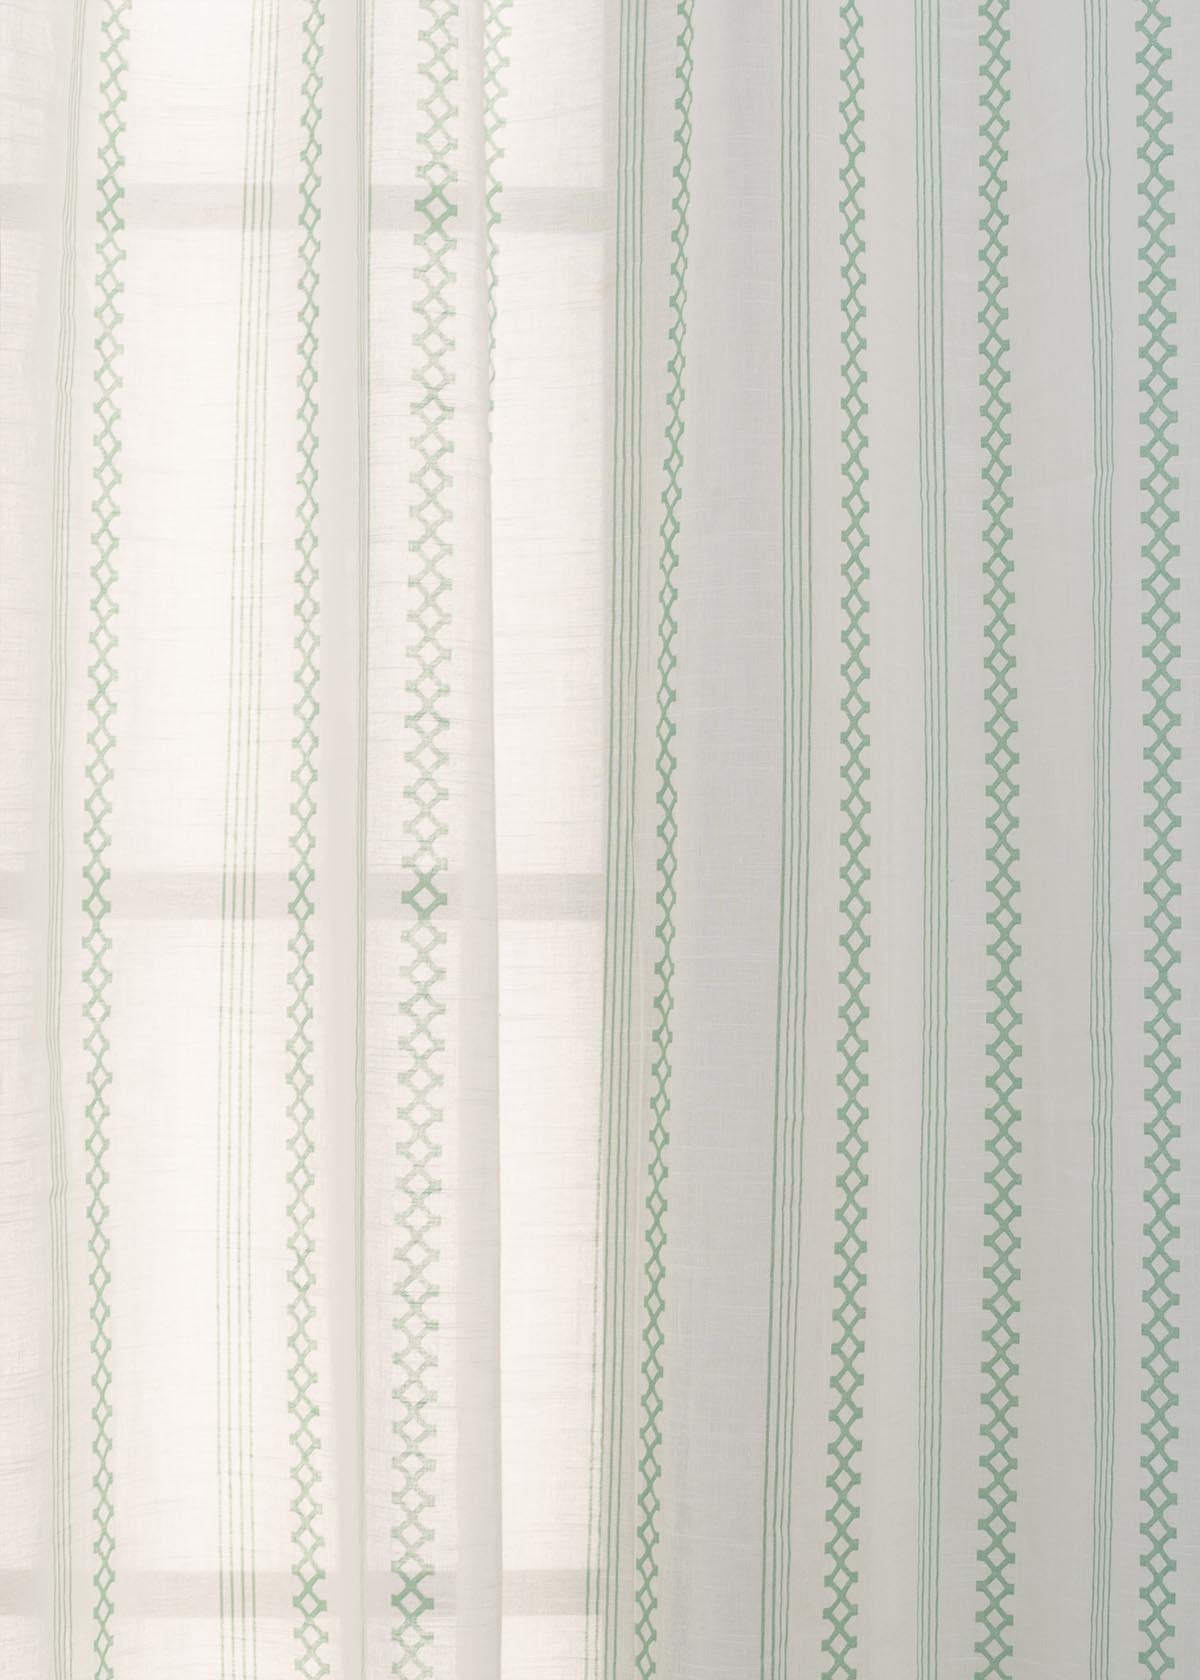 Picket Fence 100% Cotton Sheer Geometric curtain for Living room & bedroom - Light filtering - Sage Green - Pack of 1